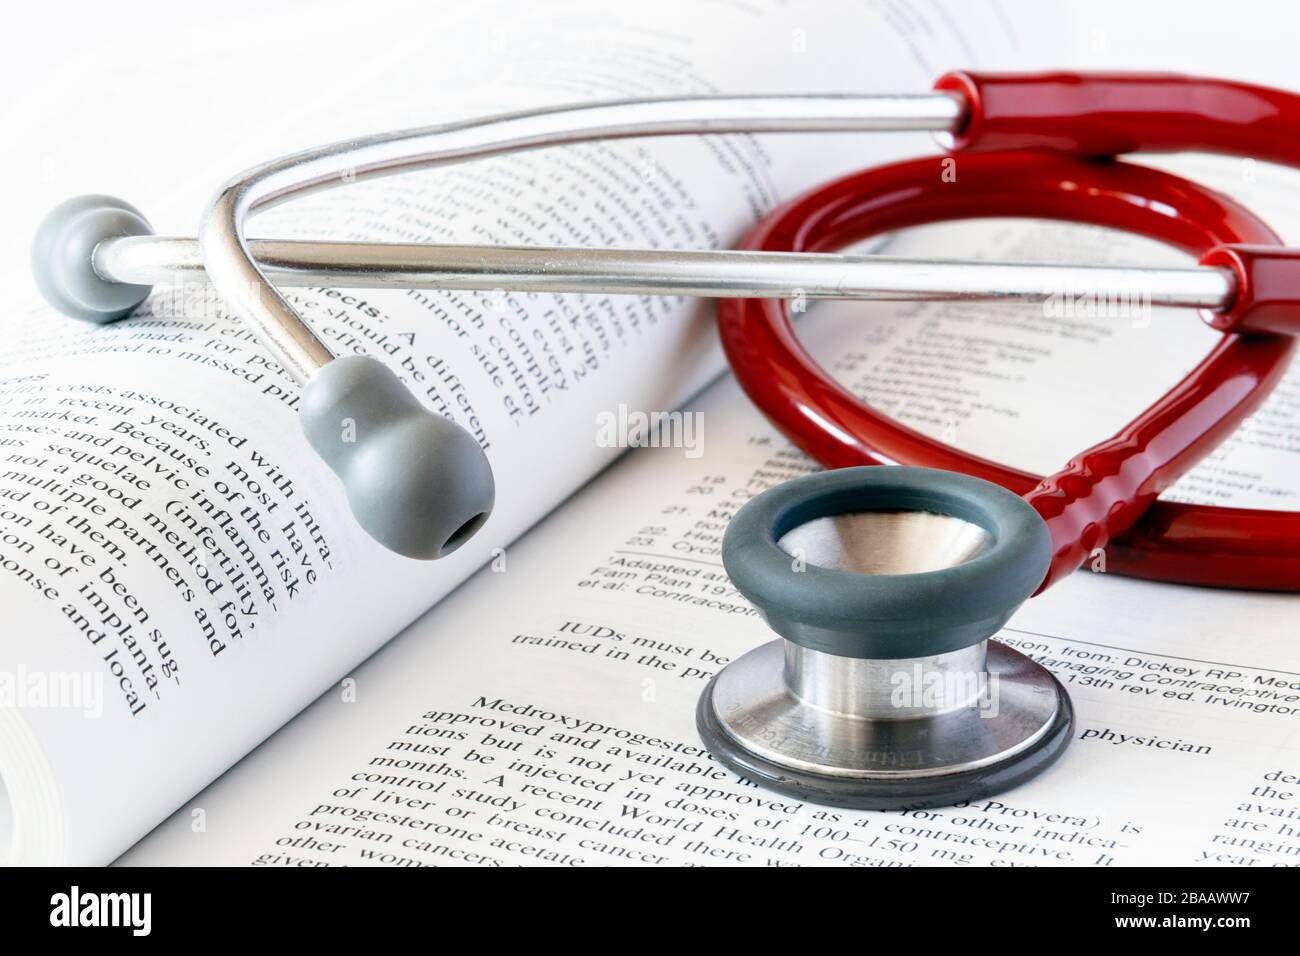 A red stethoscope on an open medical textbook Stock Photo